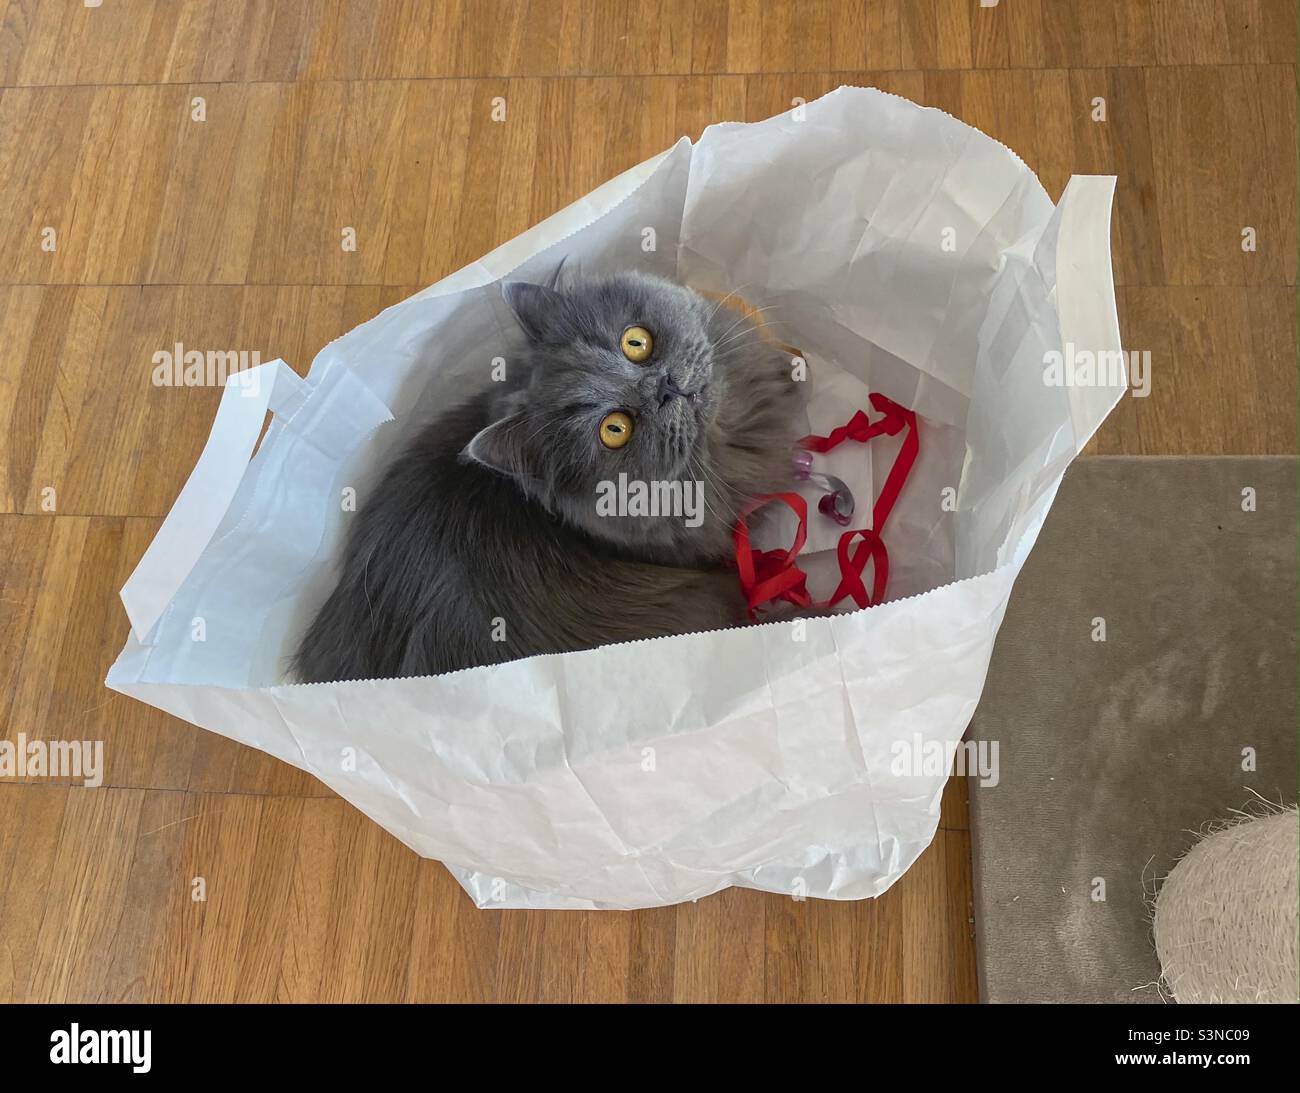 Young Blue Persian cat sitting in a paper bag with red ribbon. Stock Photo